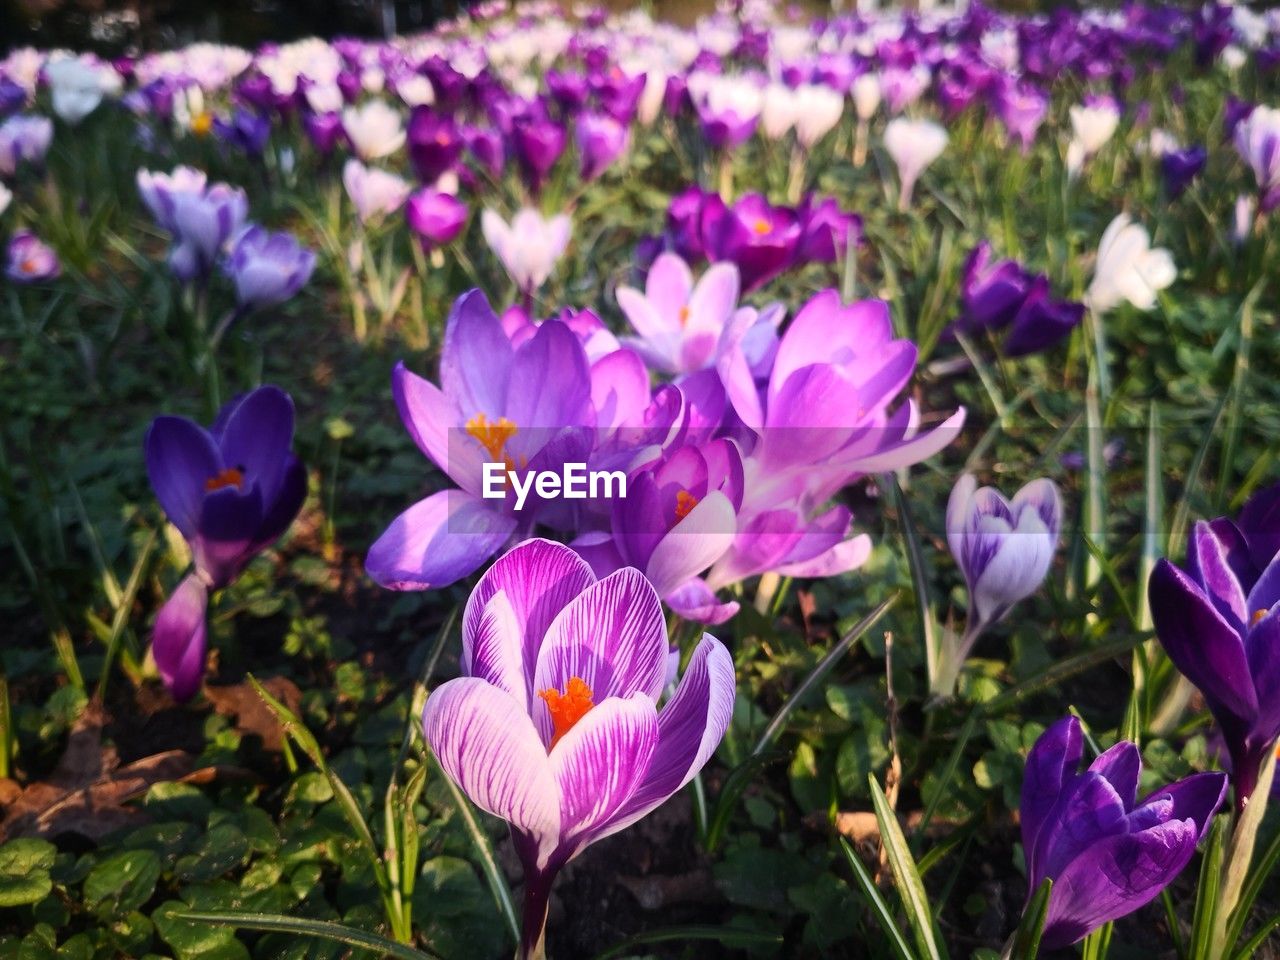 flower, flowering plant, plant, freshness, beauty in nature, purple, fragility, crocus, growth, petal, nature, close-up, flower head, inflorescence, iris, no people, focus on foreground, land, springtime, field, botany, day, outdoors, blossom, flowerbed, leaf, pink, garden, plant part, sunlight